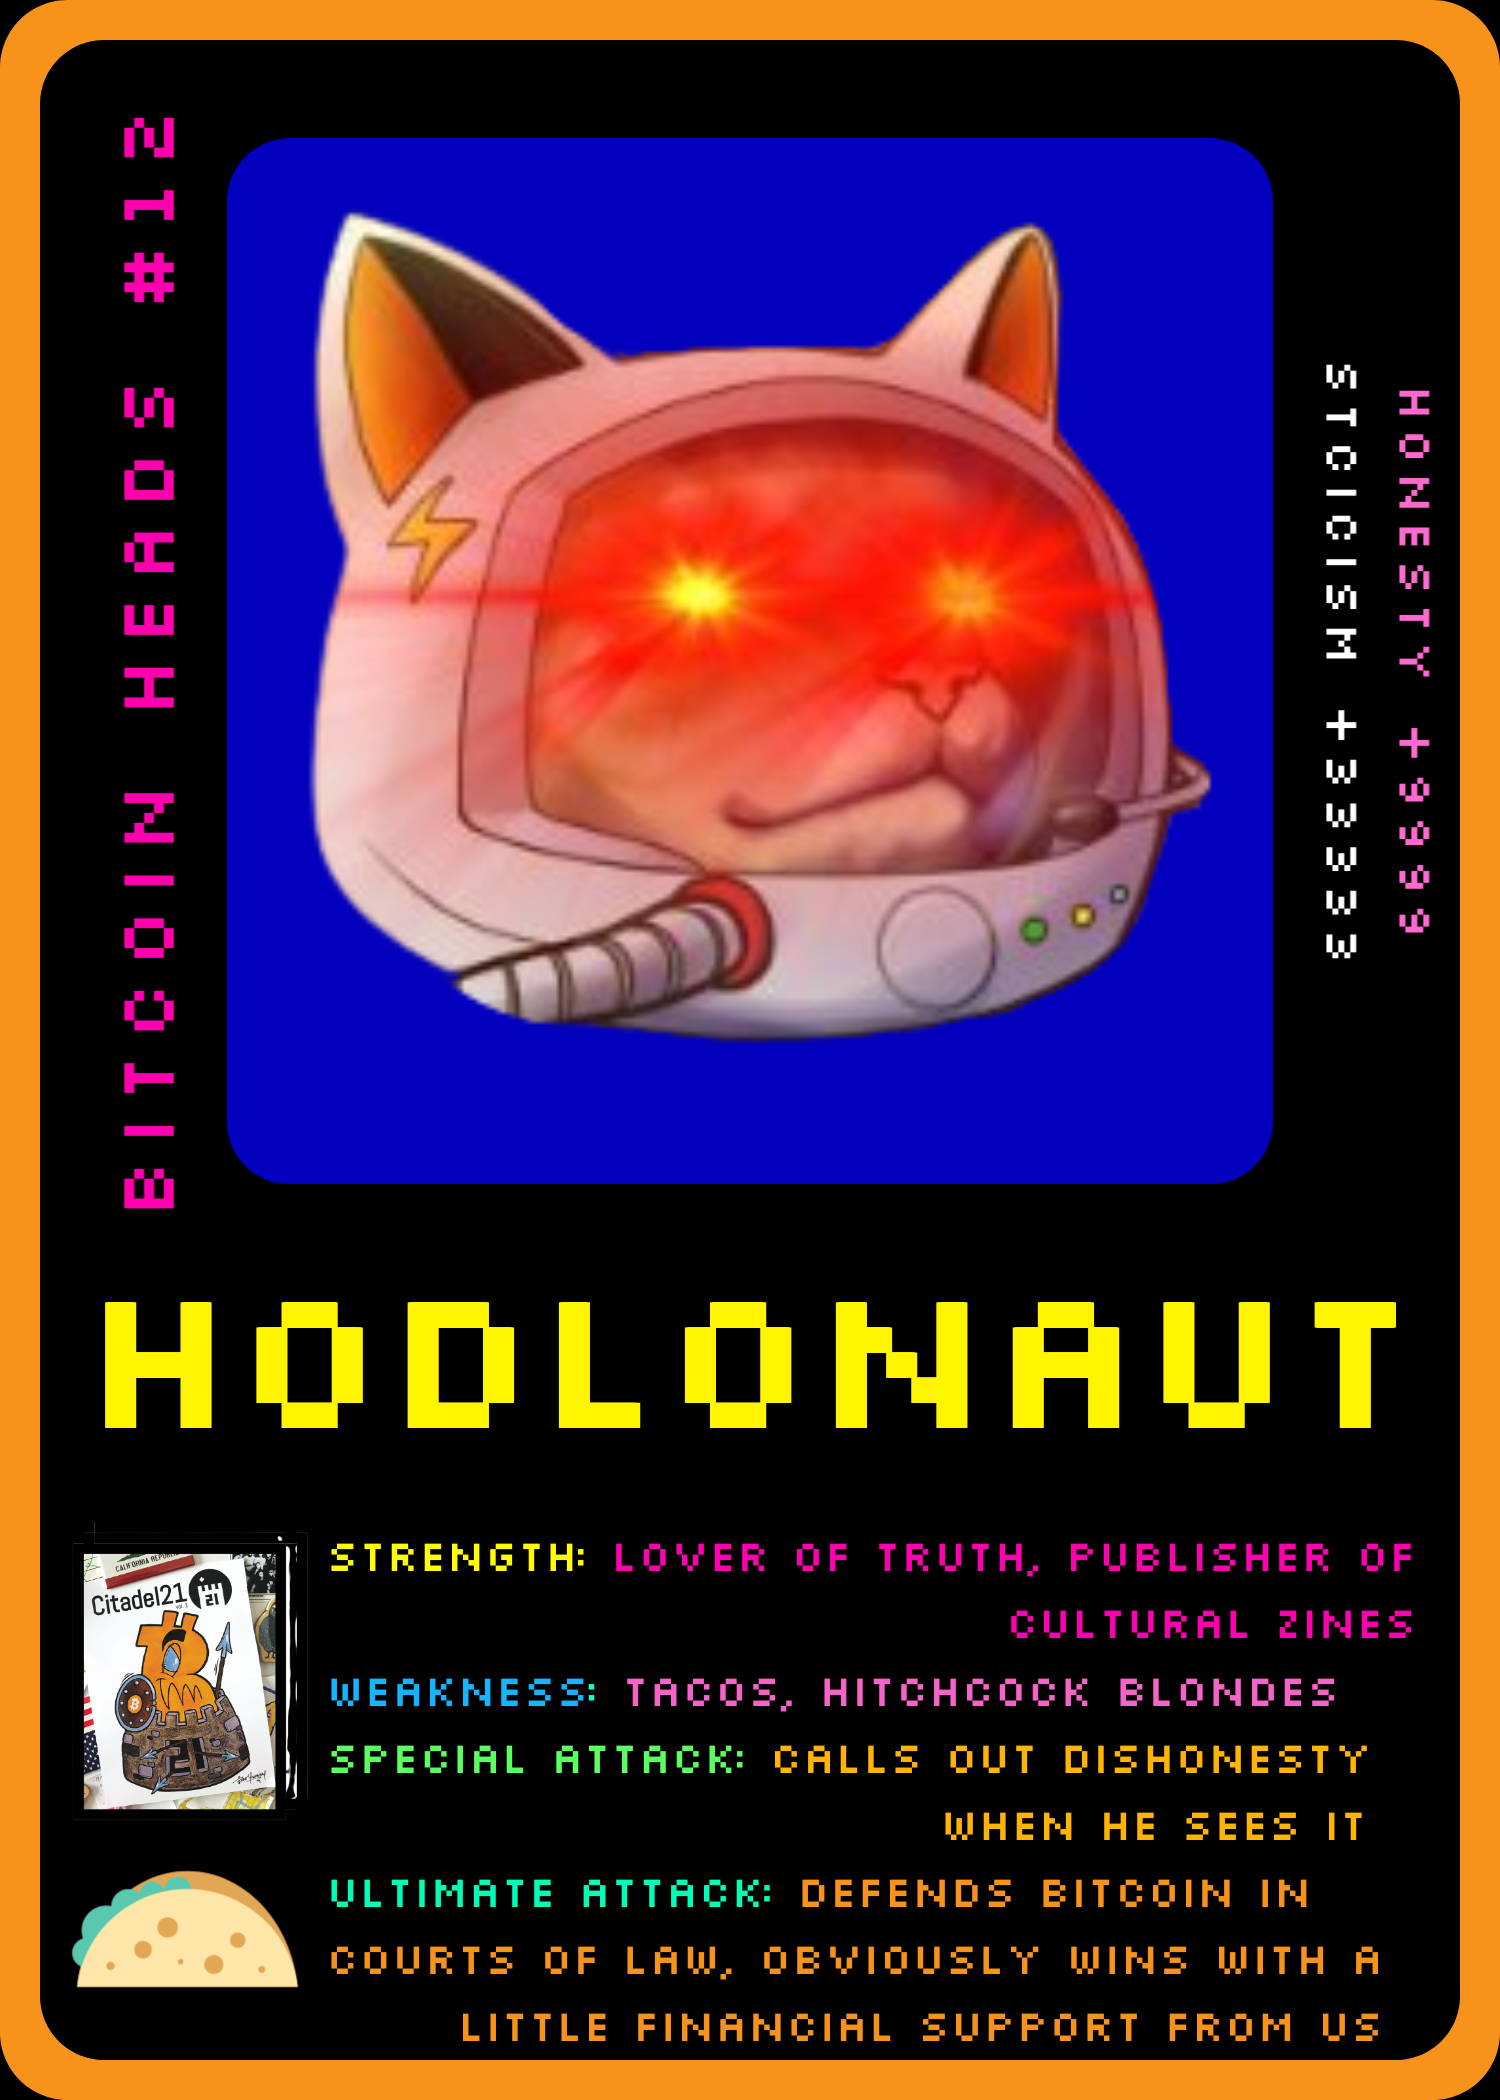 HODLONAUTHED CARD